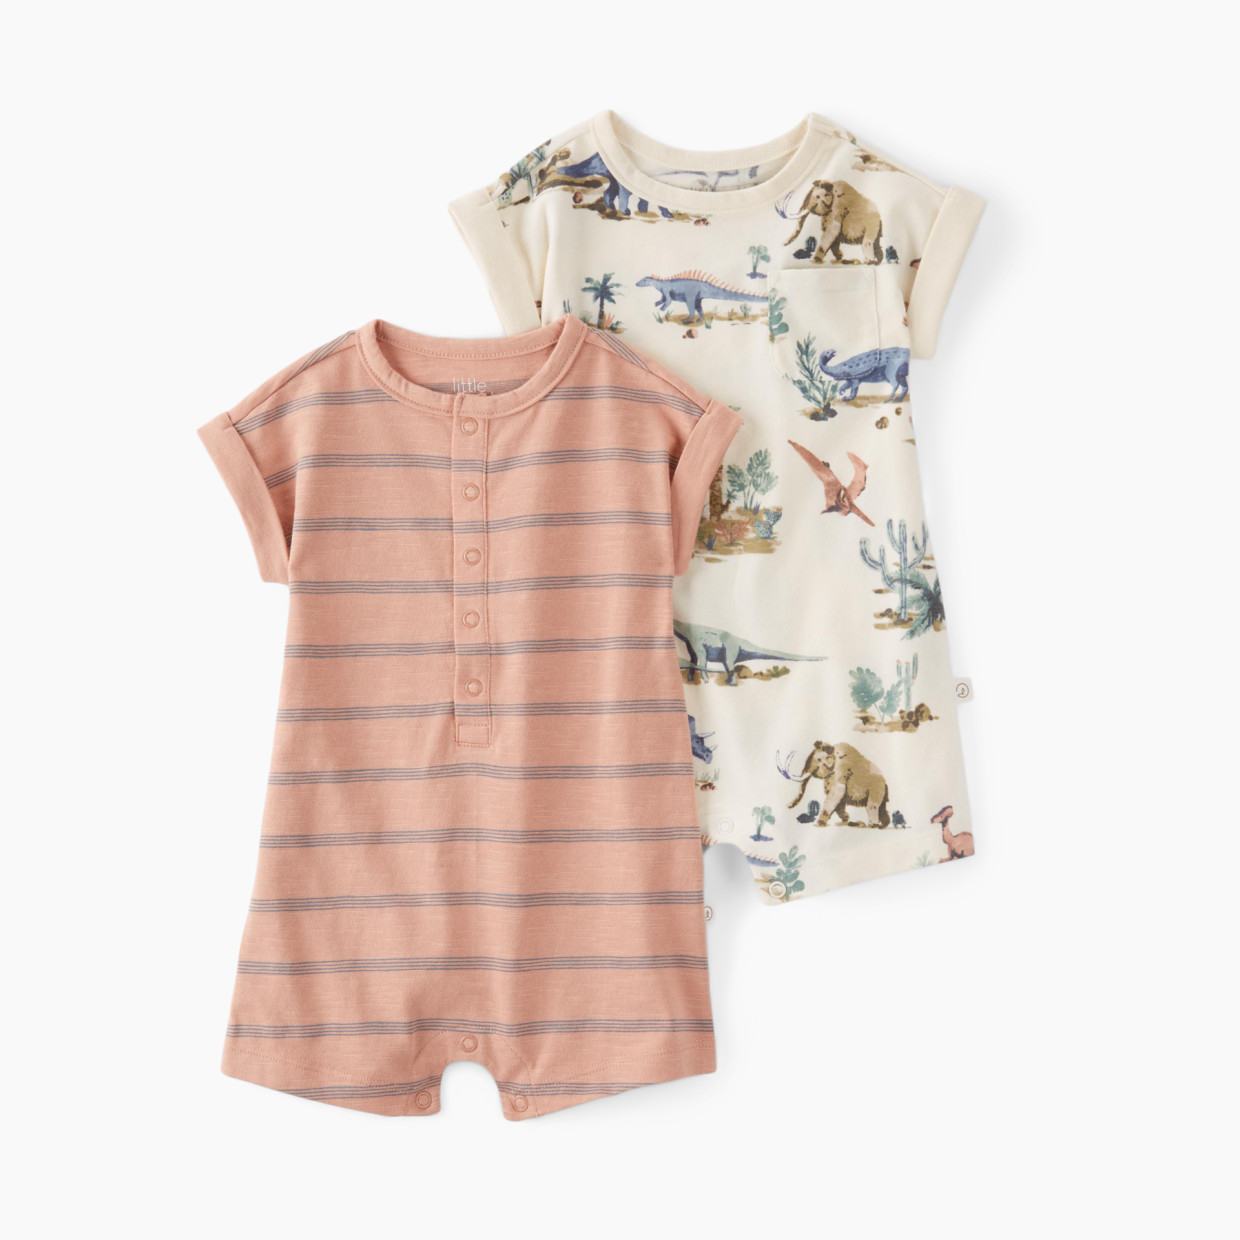 Carter's Little Planet 2-Pack Organic Cotton Rompers - Multi-Color, 6 M.